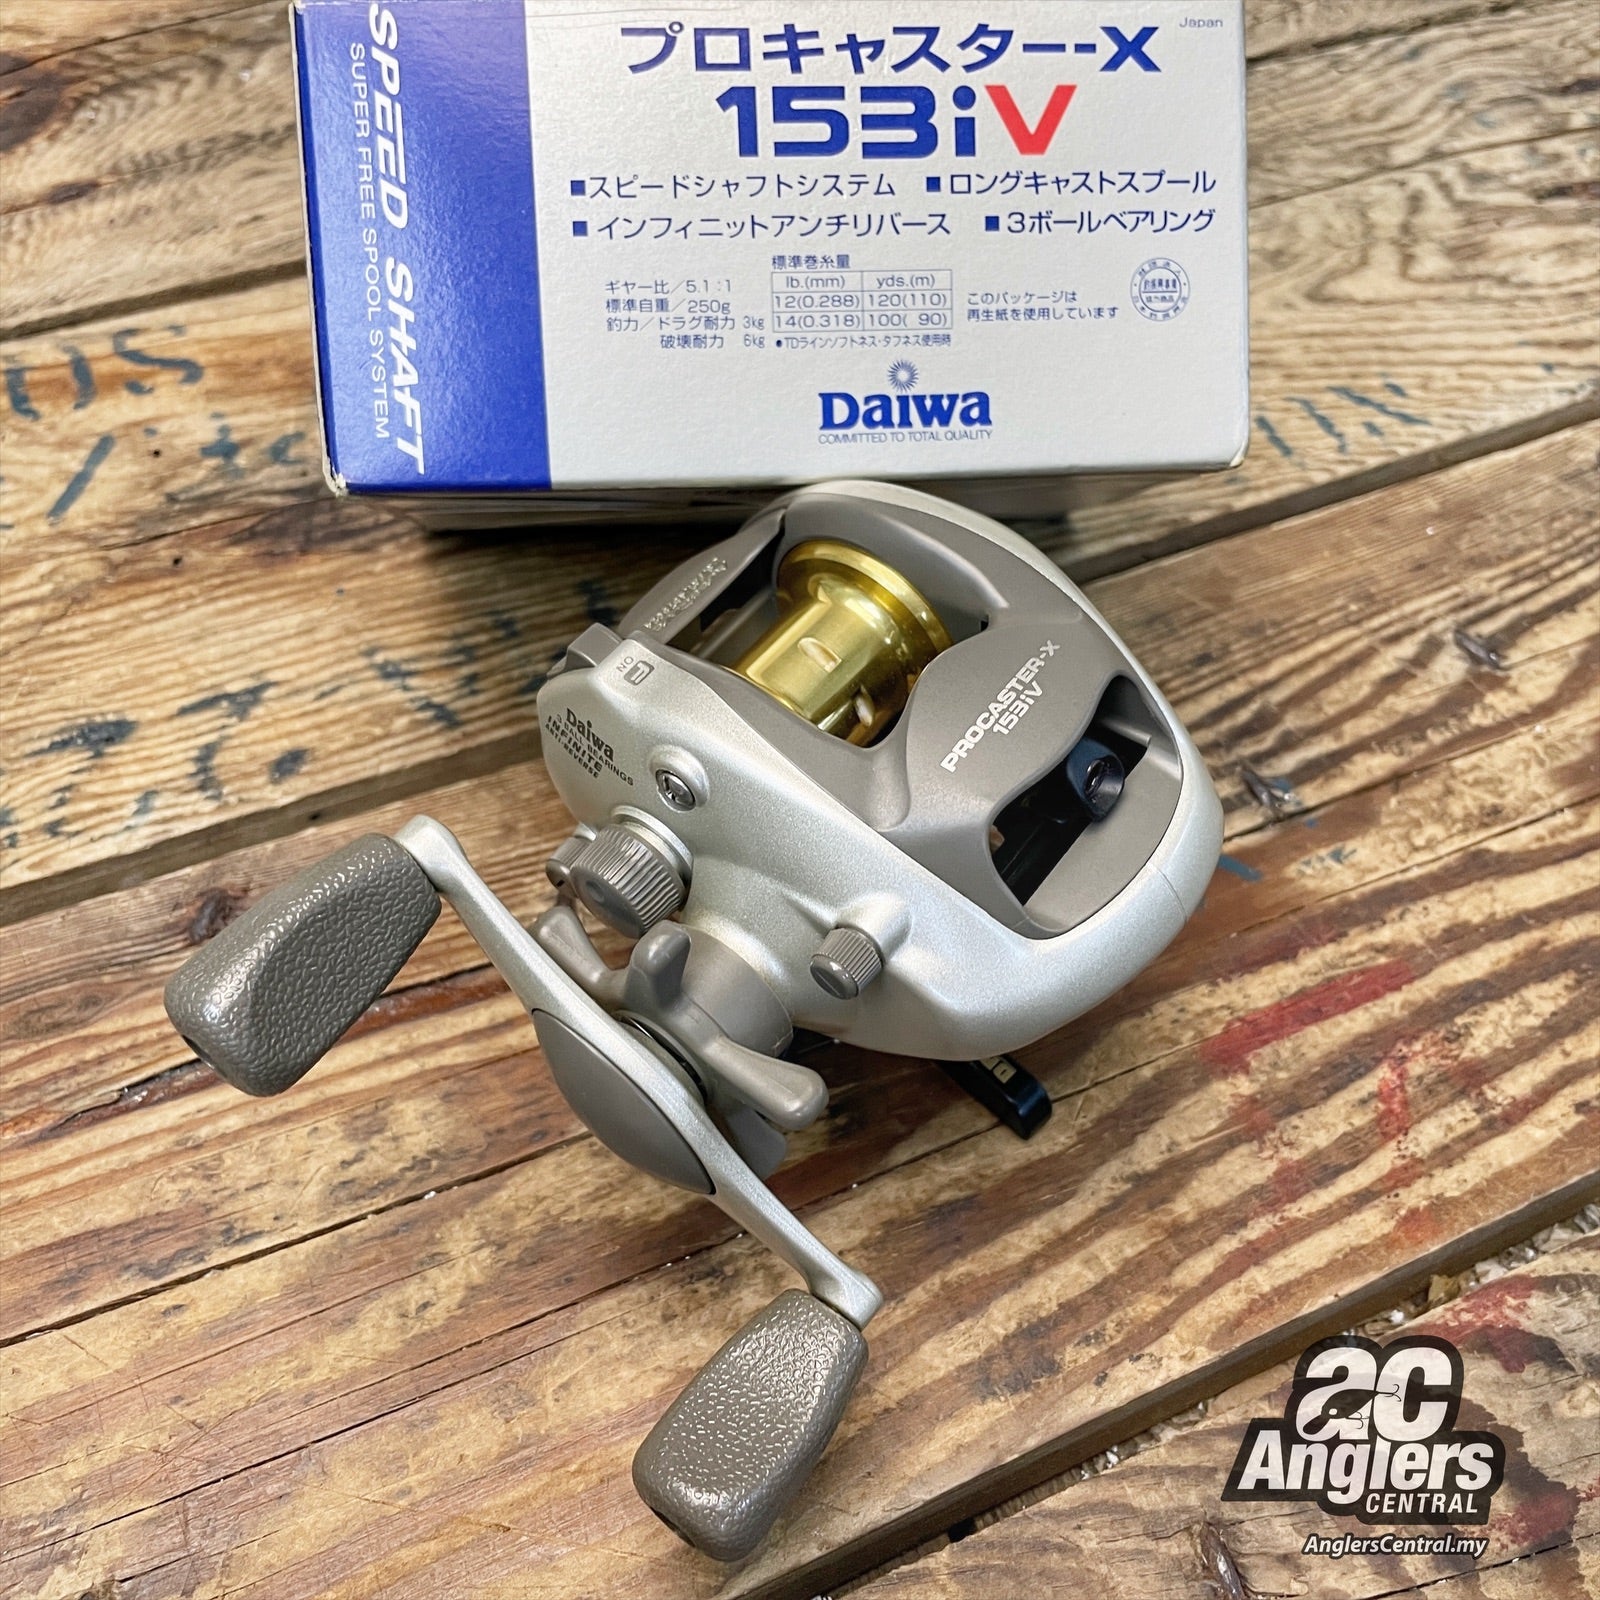 Procaster-X 153iV (Unused) – Anglers Central